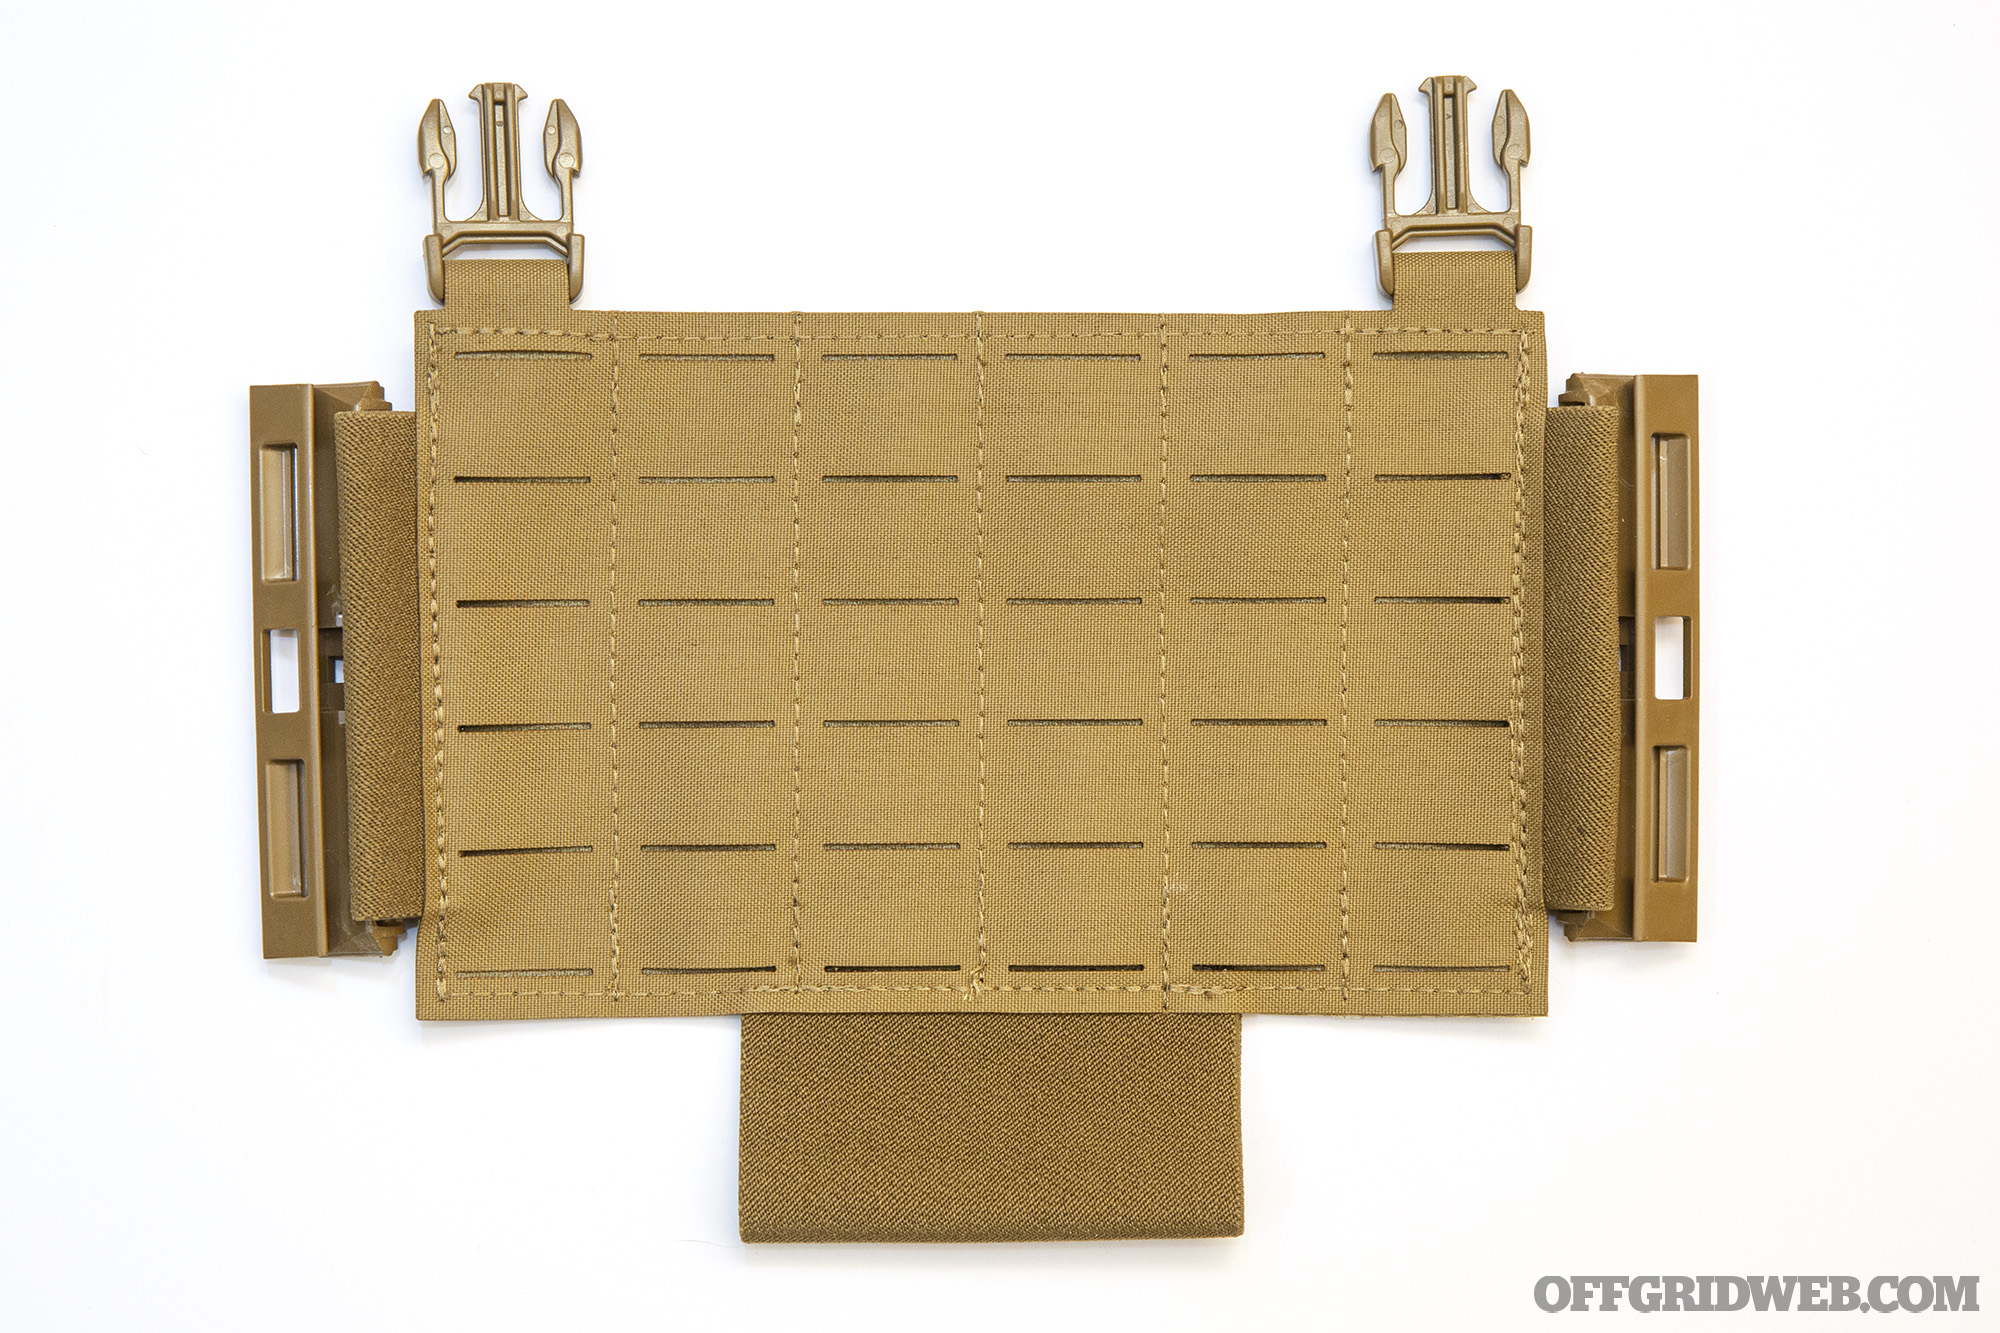 Plate Carrier Placards Overview: Part 2